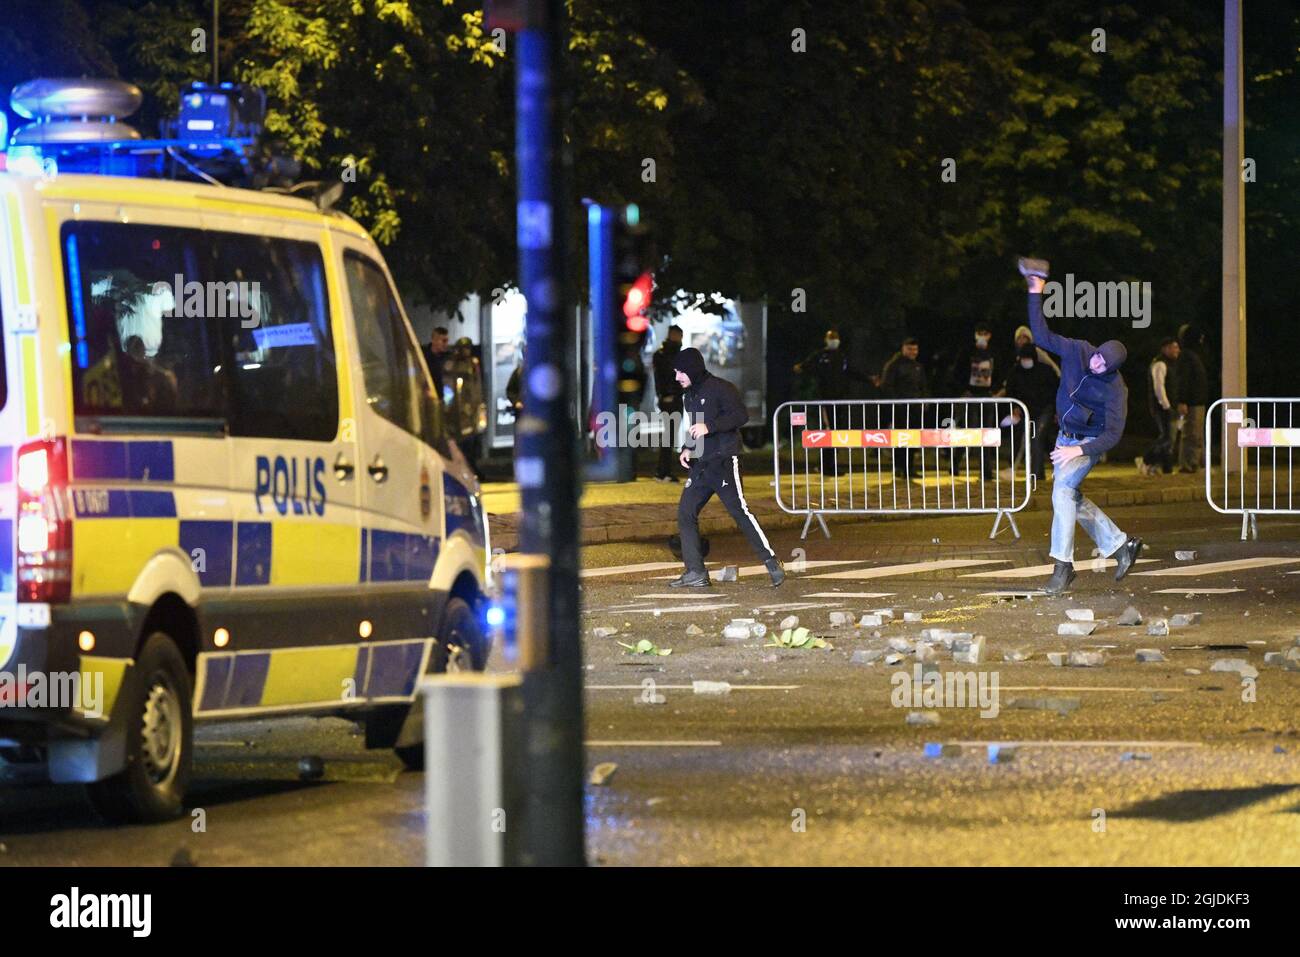 Demonstrators throw stones at police as protesters riot in the Rosengard neighbourhood of Malmo, Sweden, on Aug. 28, 2020. The protest was sparked by the burning of a coran by members of Danish far-right party Stram Kurs earlier in the day. The party's leader Rasmus Paludan was denied entry to Sweden for a manifestation on Friday. Photo: TT News Agency / code 50090 *** SWEDEN OUT ***  Stock Photo